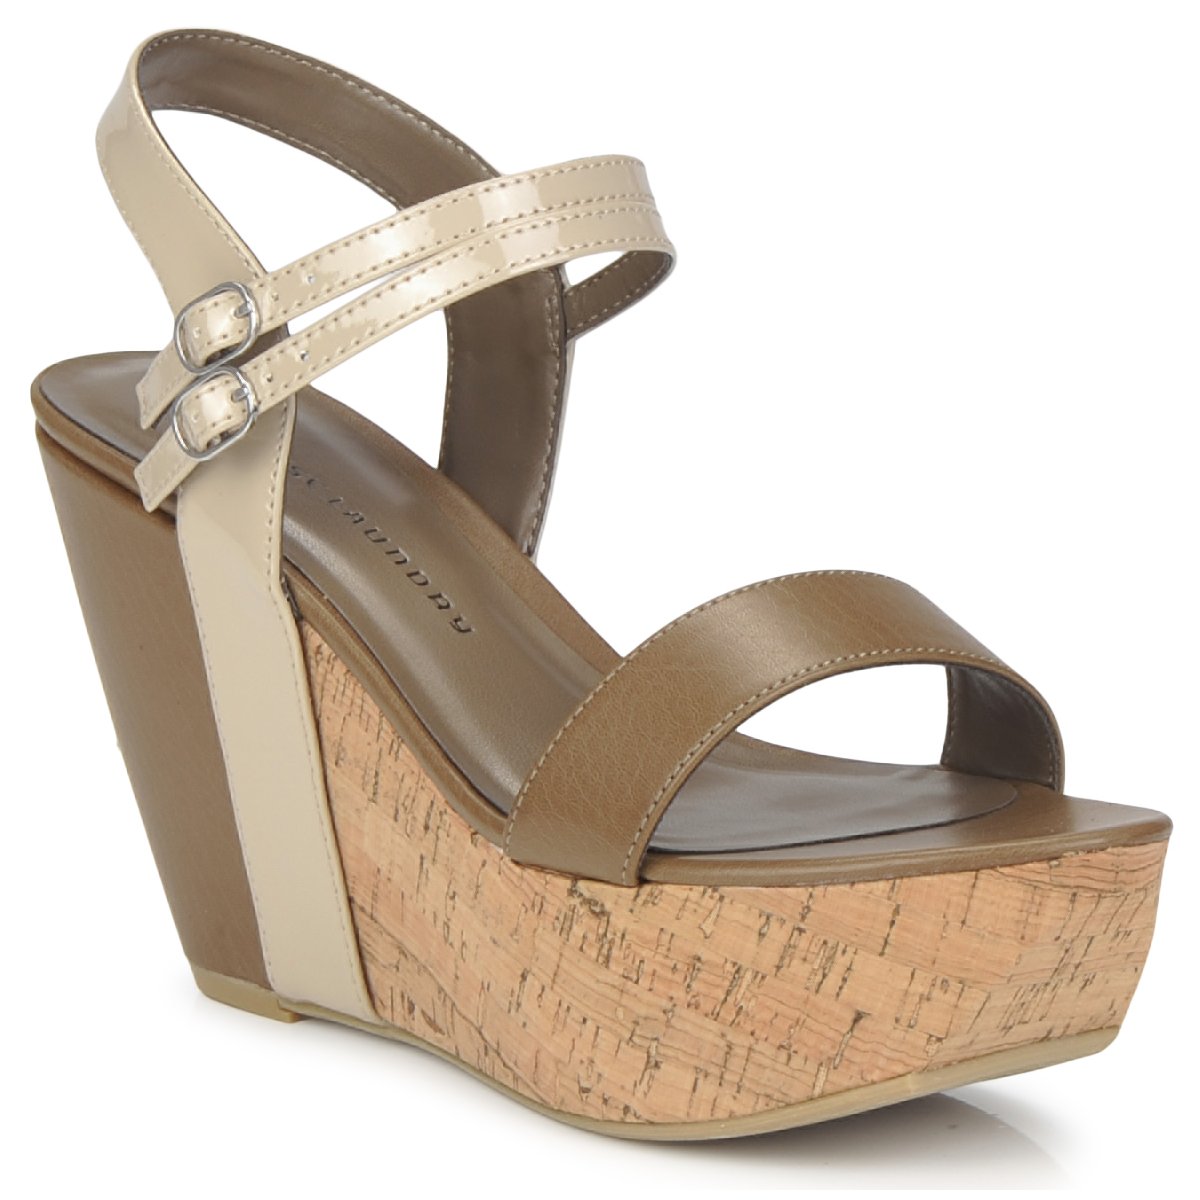 Buty Damskie Sandały Chinese Laundry GO GETTER Taupe / Dk / Beżowy